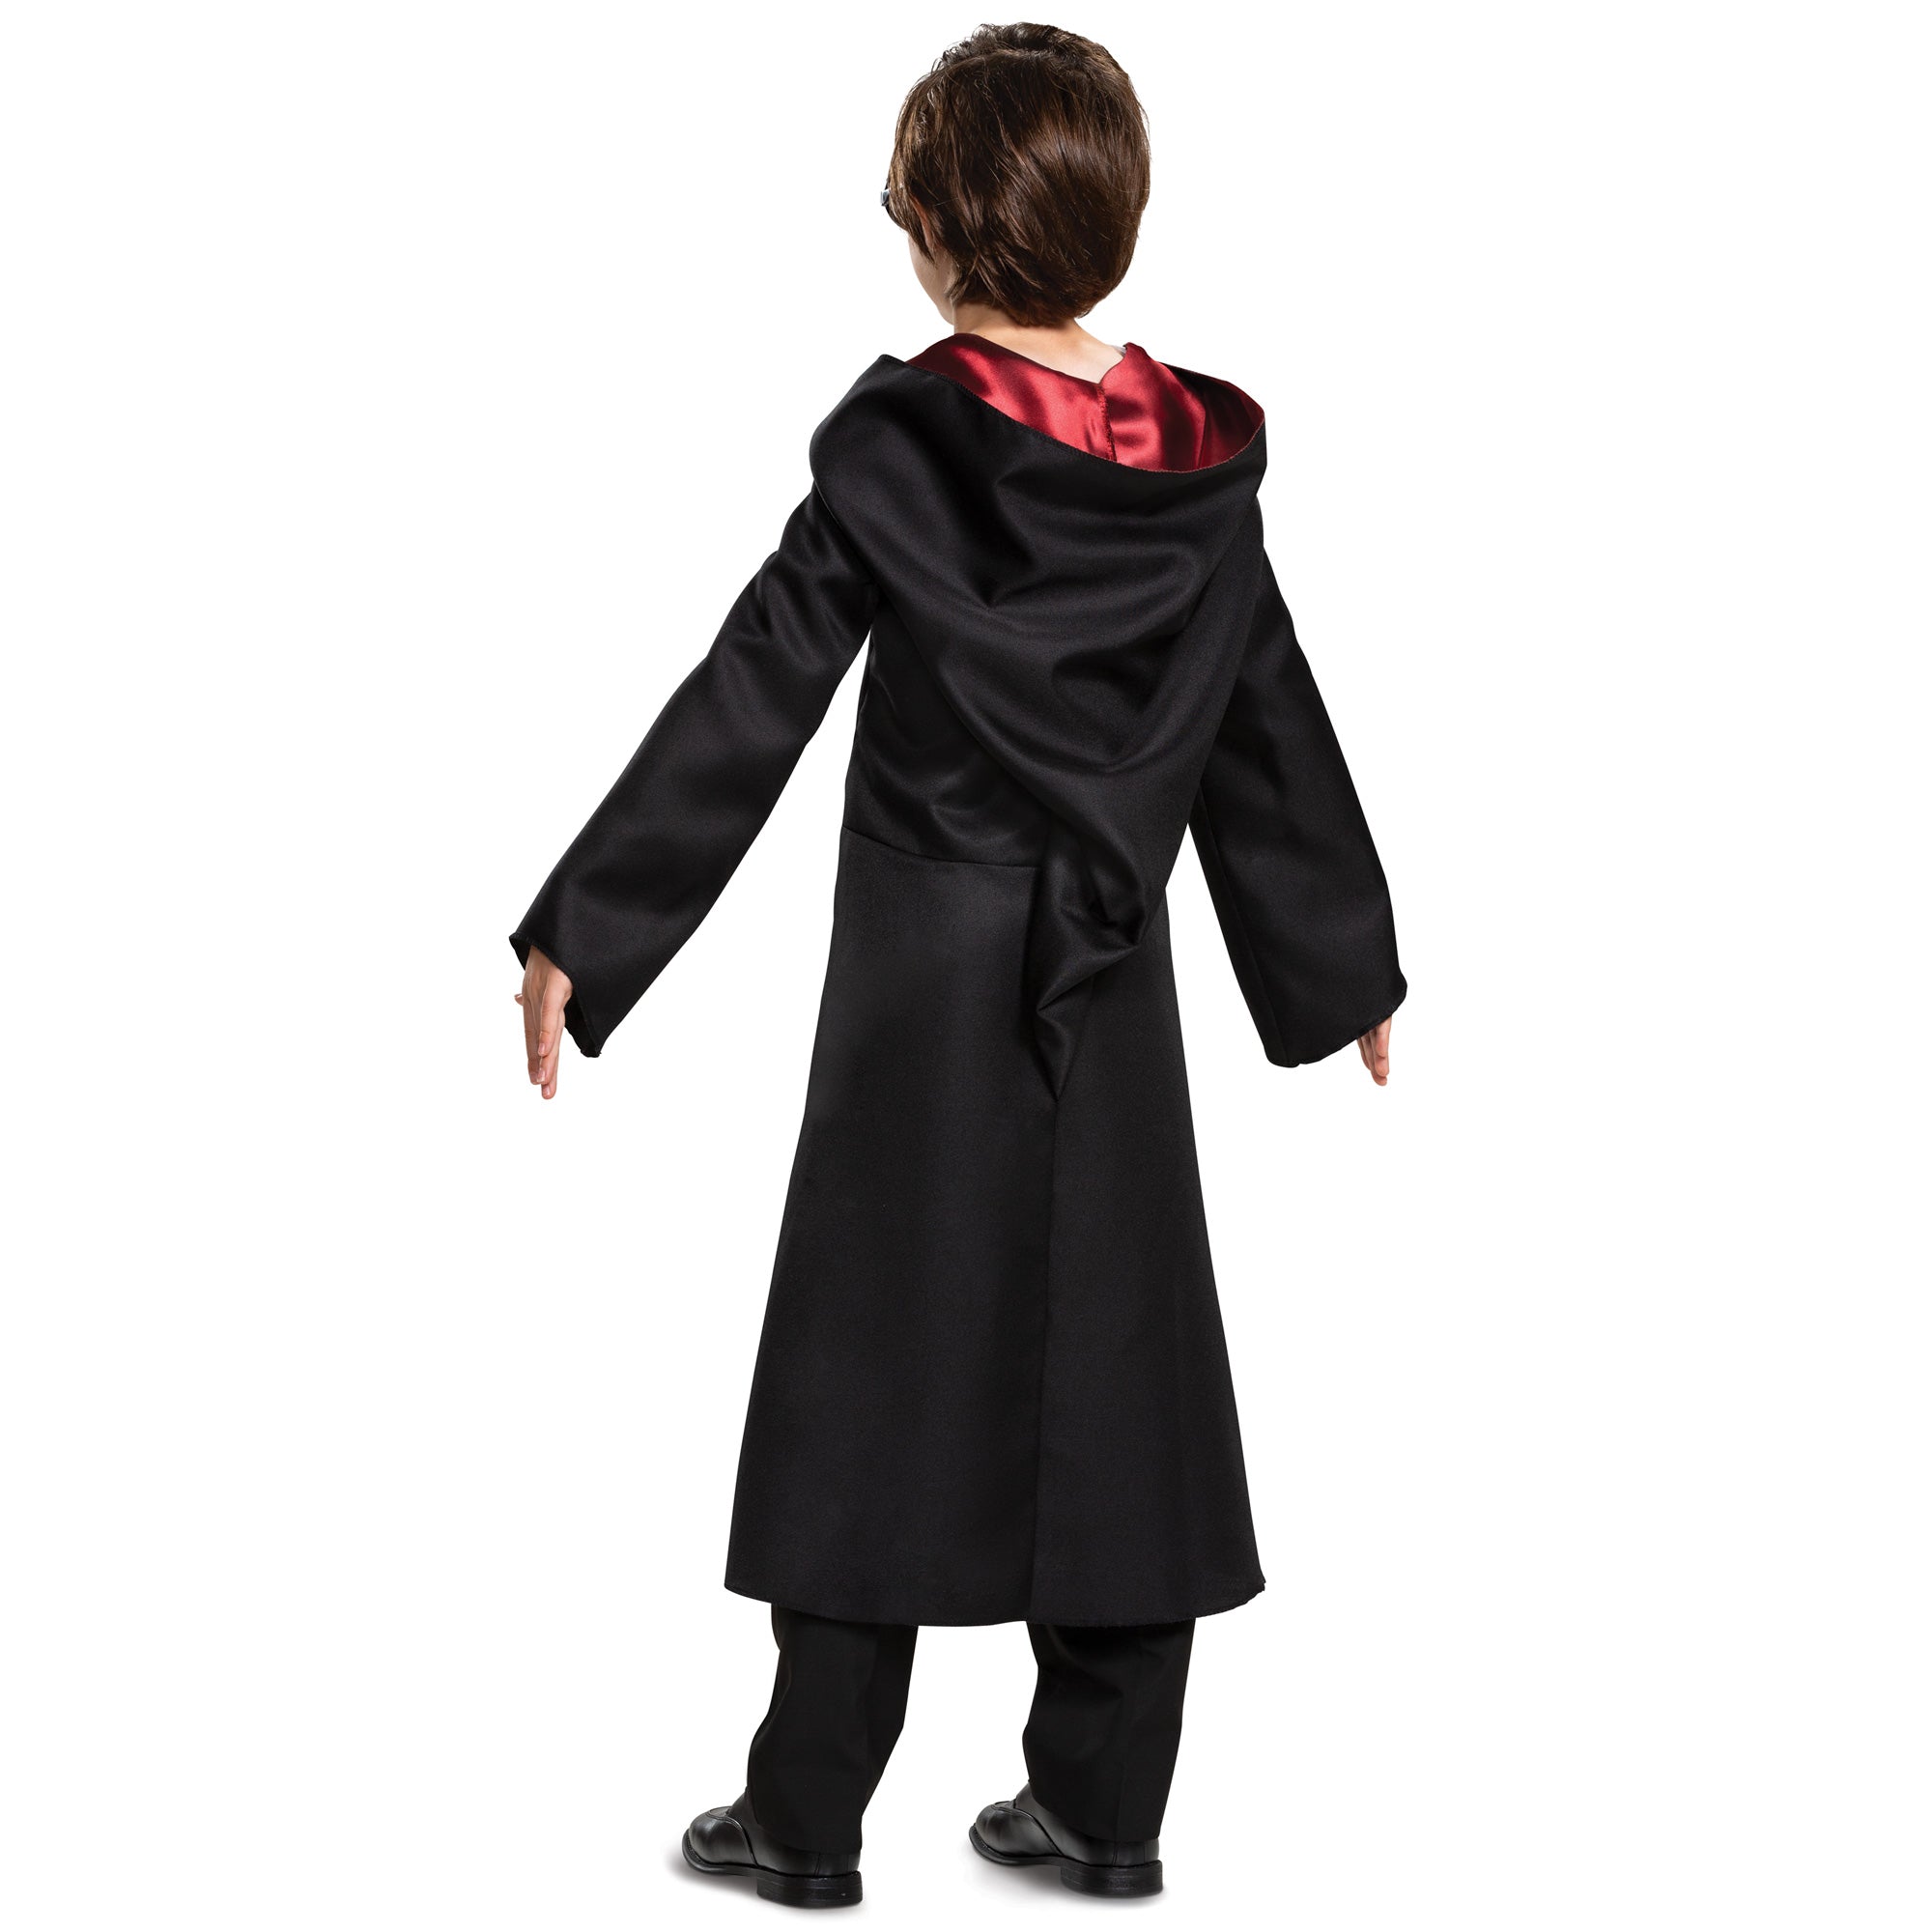 http://www.party-expert.com/cdn/shop/products/toy-sport-costumes-harry-potter-gryffindor-robe-costume-for-kids-32008914927802.jpg?v=1660098055&width=2000